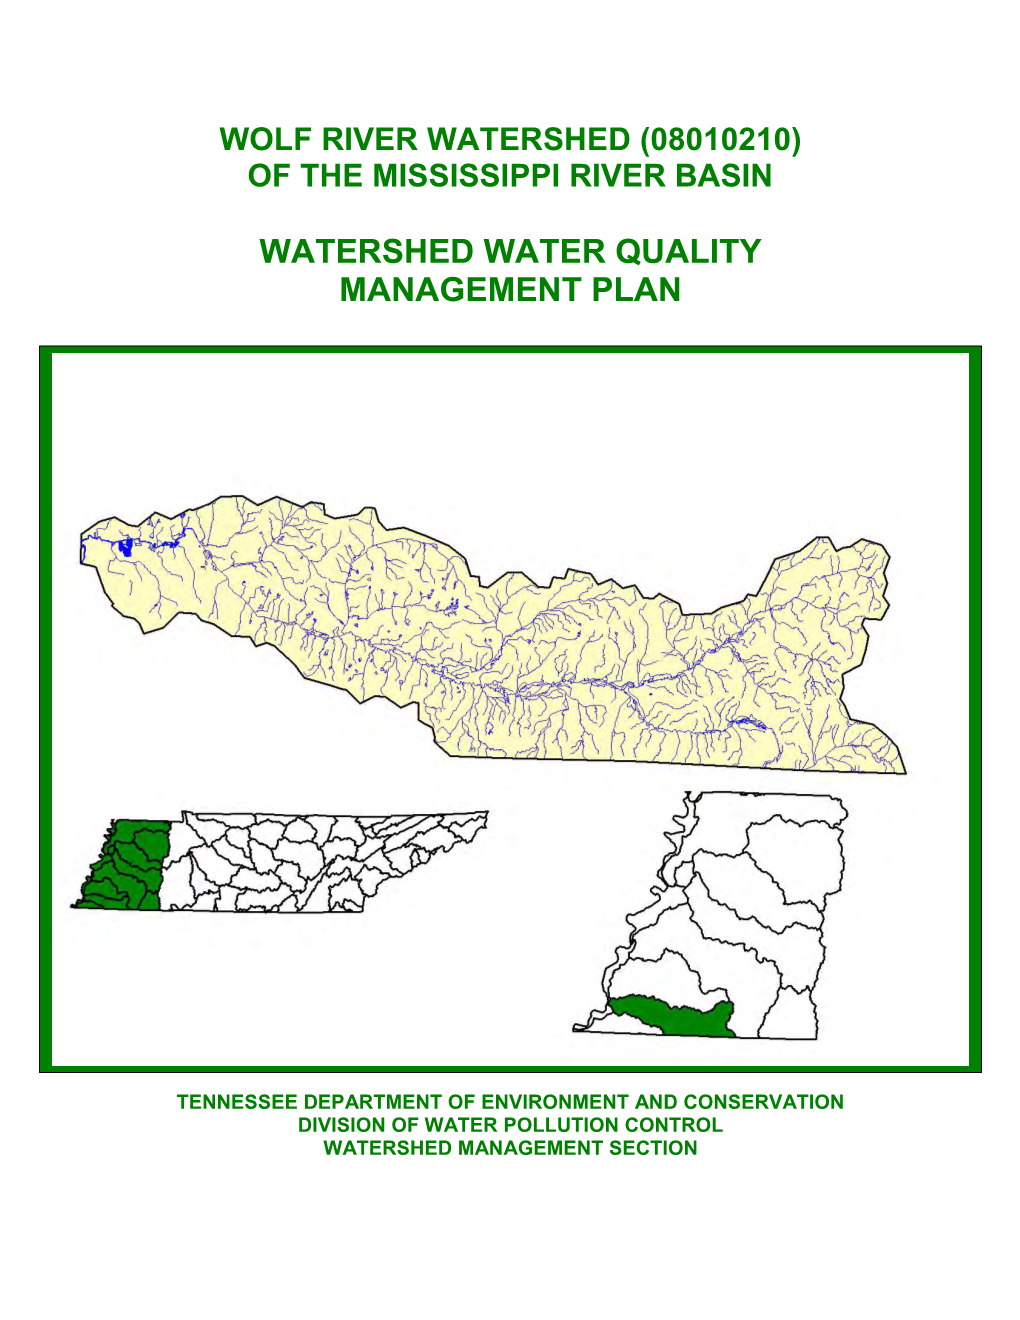 Wolf River Watershed (08010210) of the Mississippi River Basin